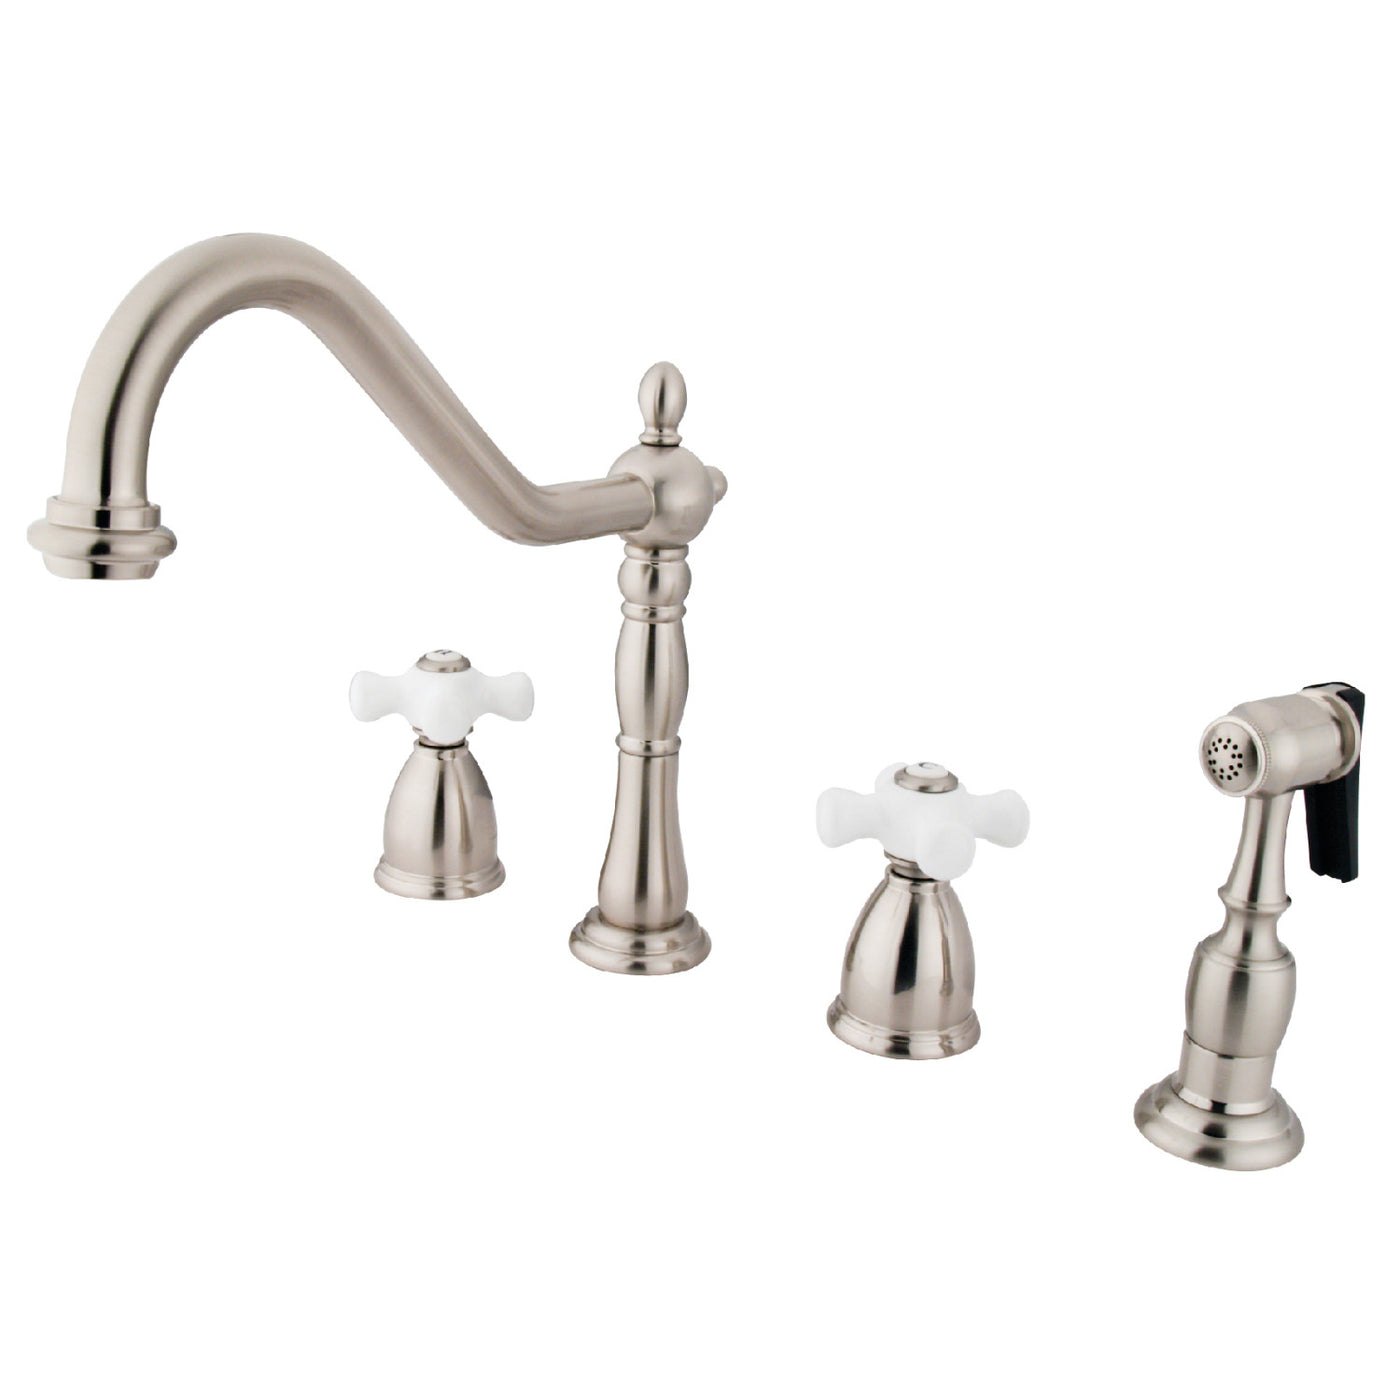 Elements of Design EB1798PXBS Widespread Kitchen Faucet with Brass Sprayer, Brushed Nickel